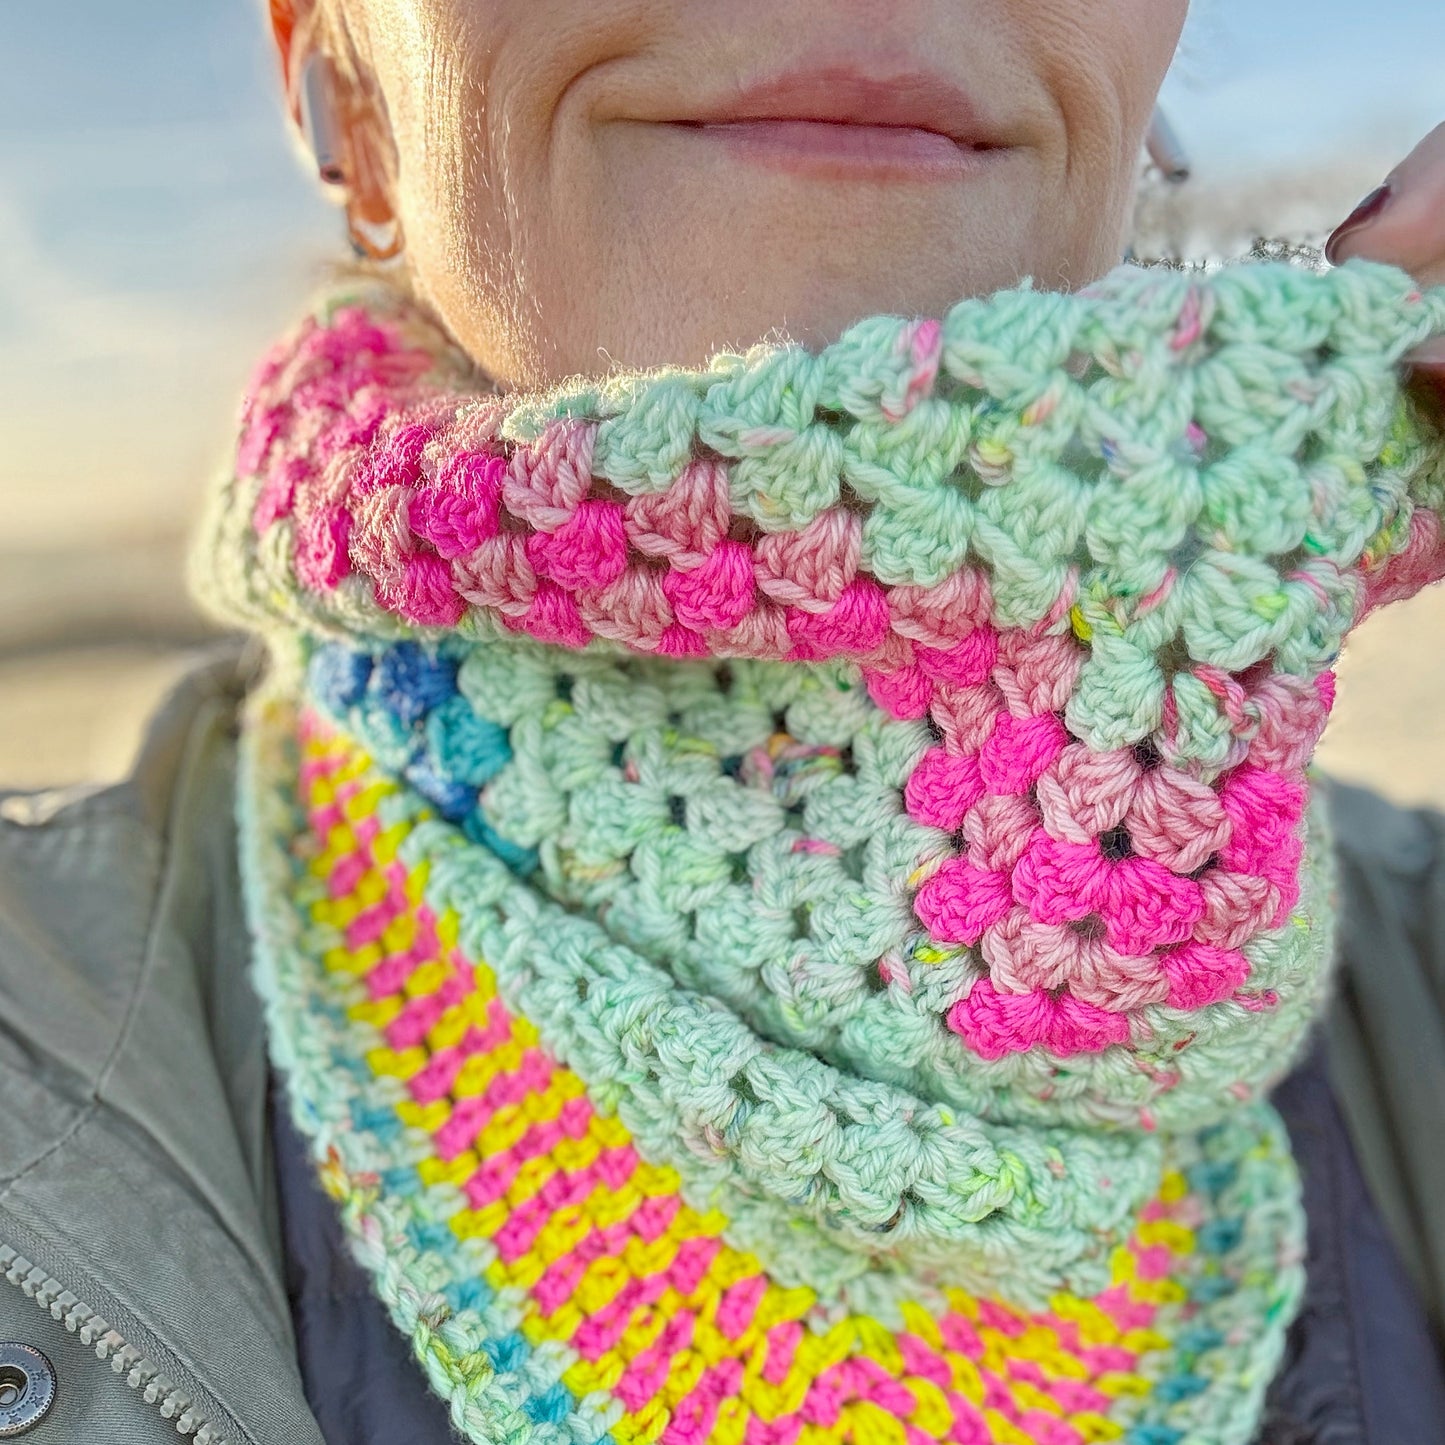 Granny Cowl Kit - Pattern by Zeens and Roger - Morning Mist at Combs / Winter Mini Set